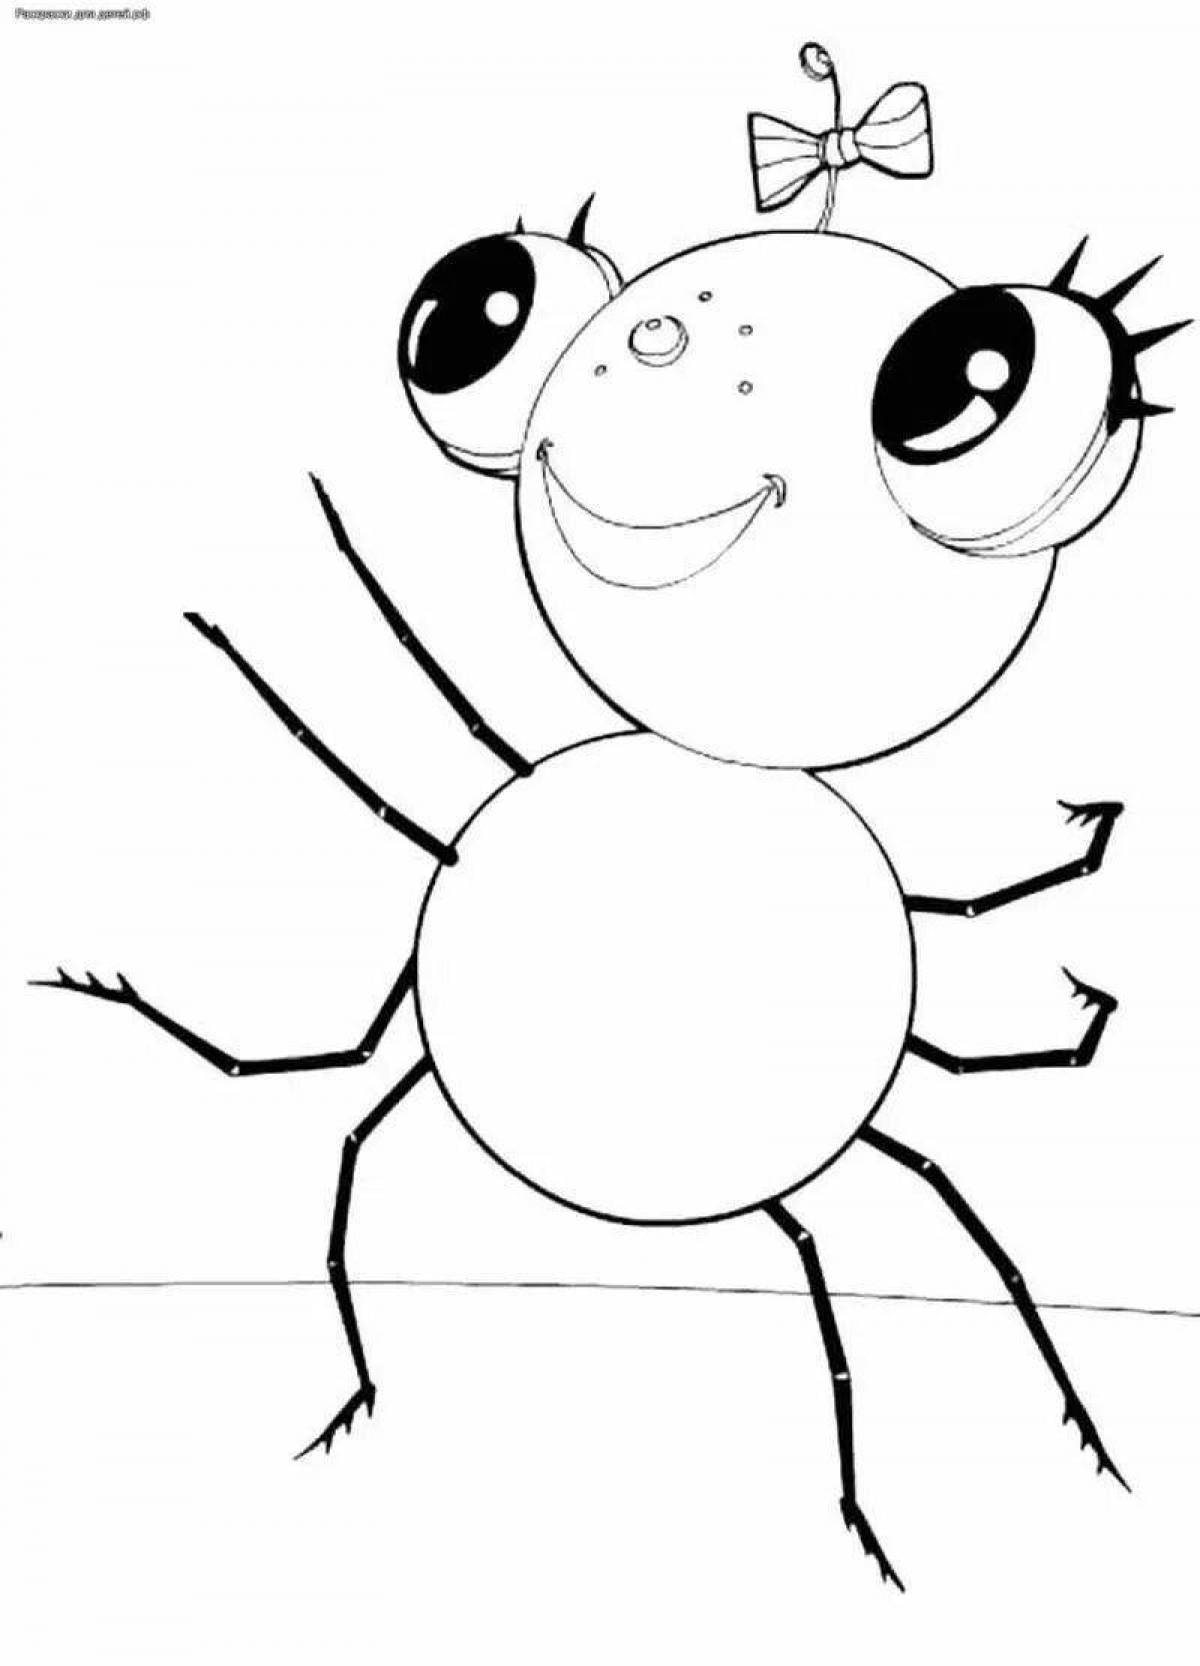 Cute spider coloring pages for kids